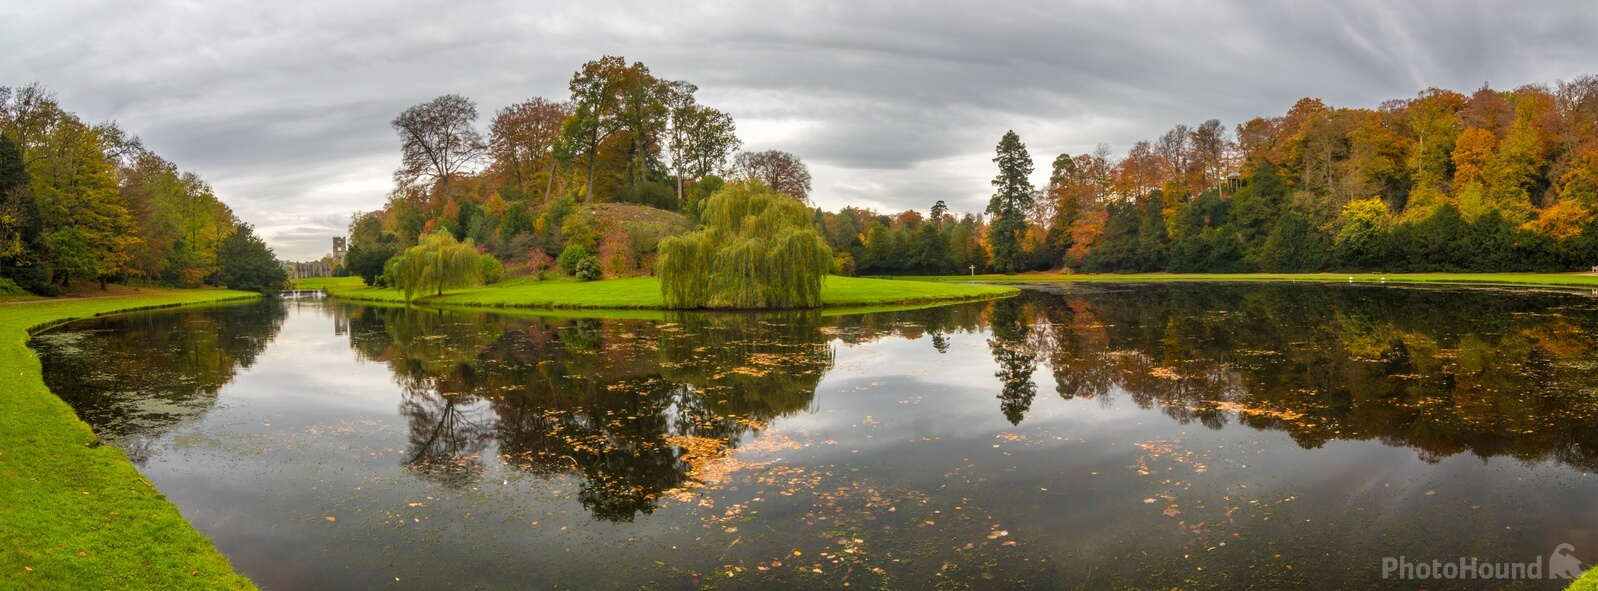 Image of Fountains Abbey by Andy Killingbeck